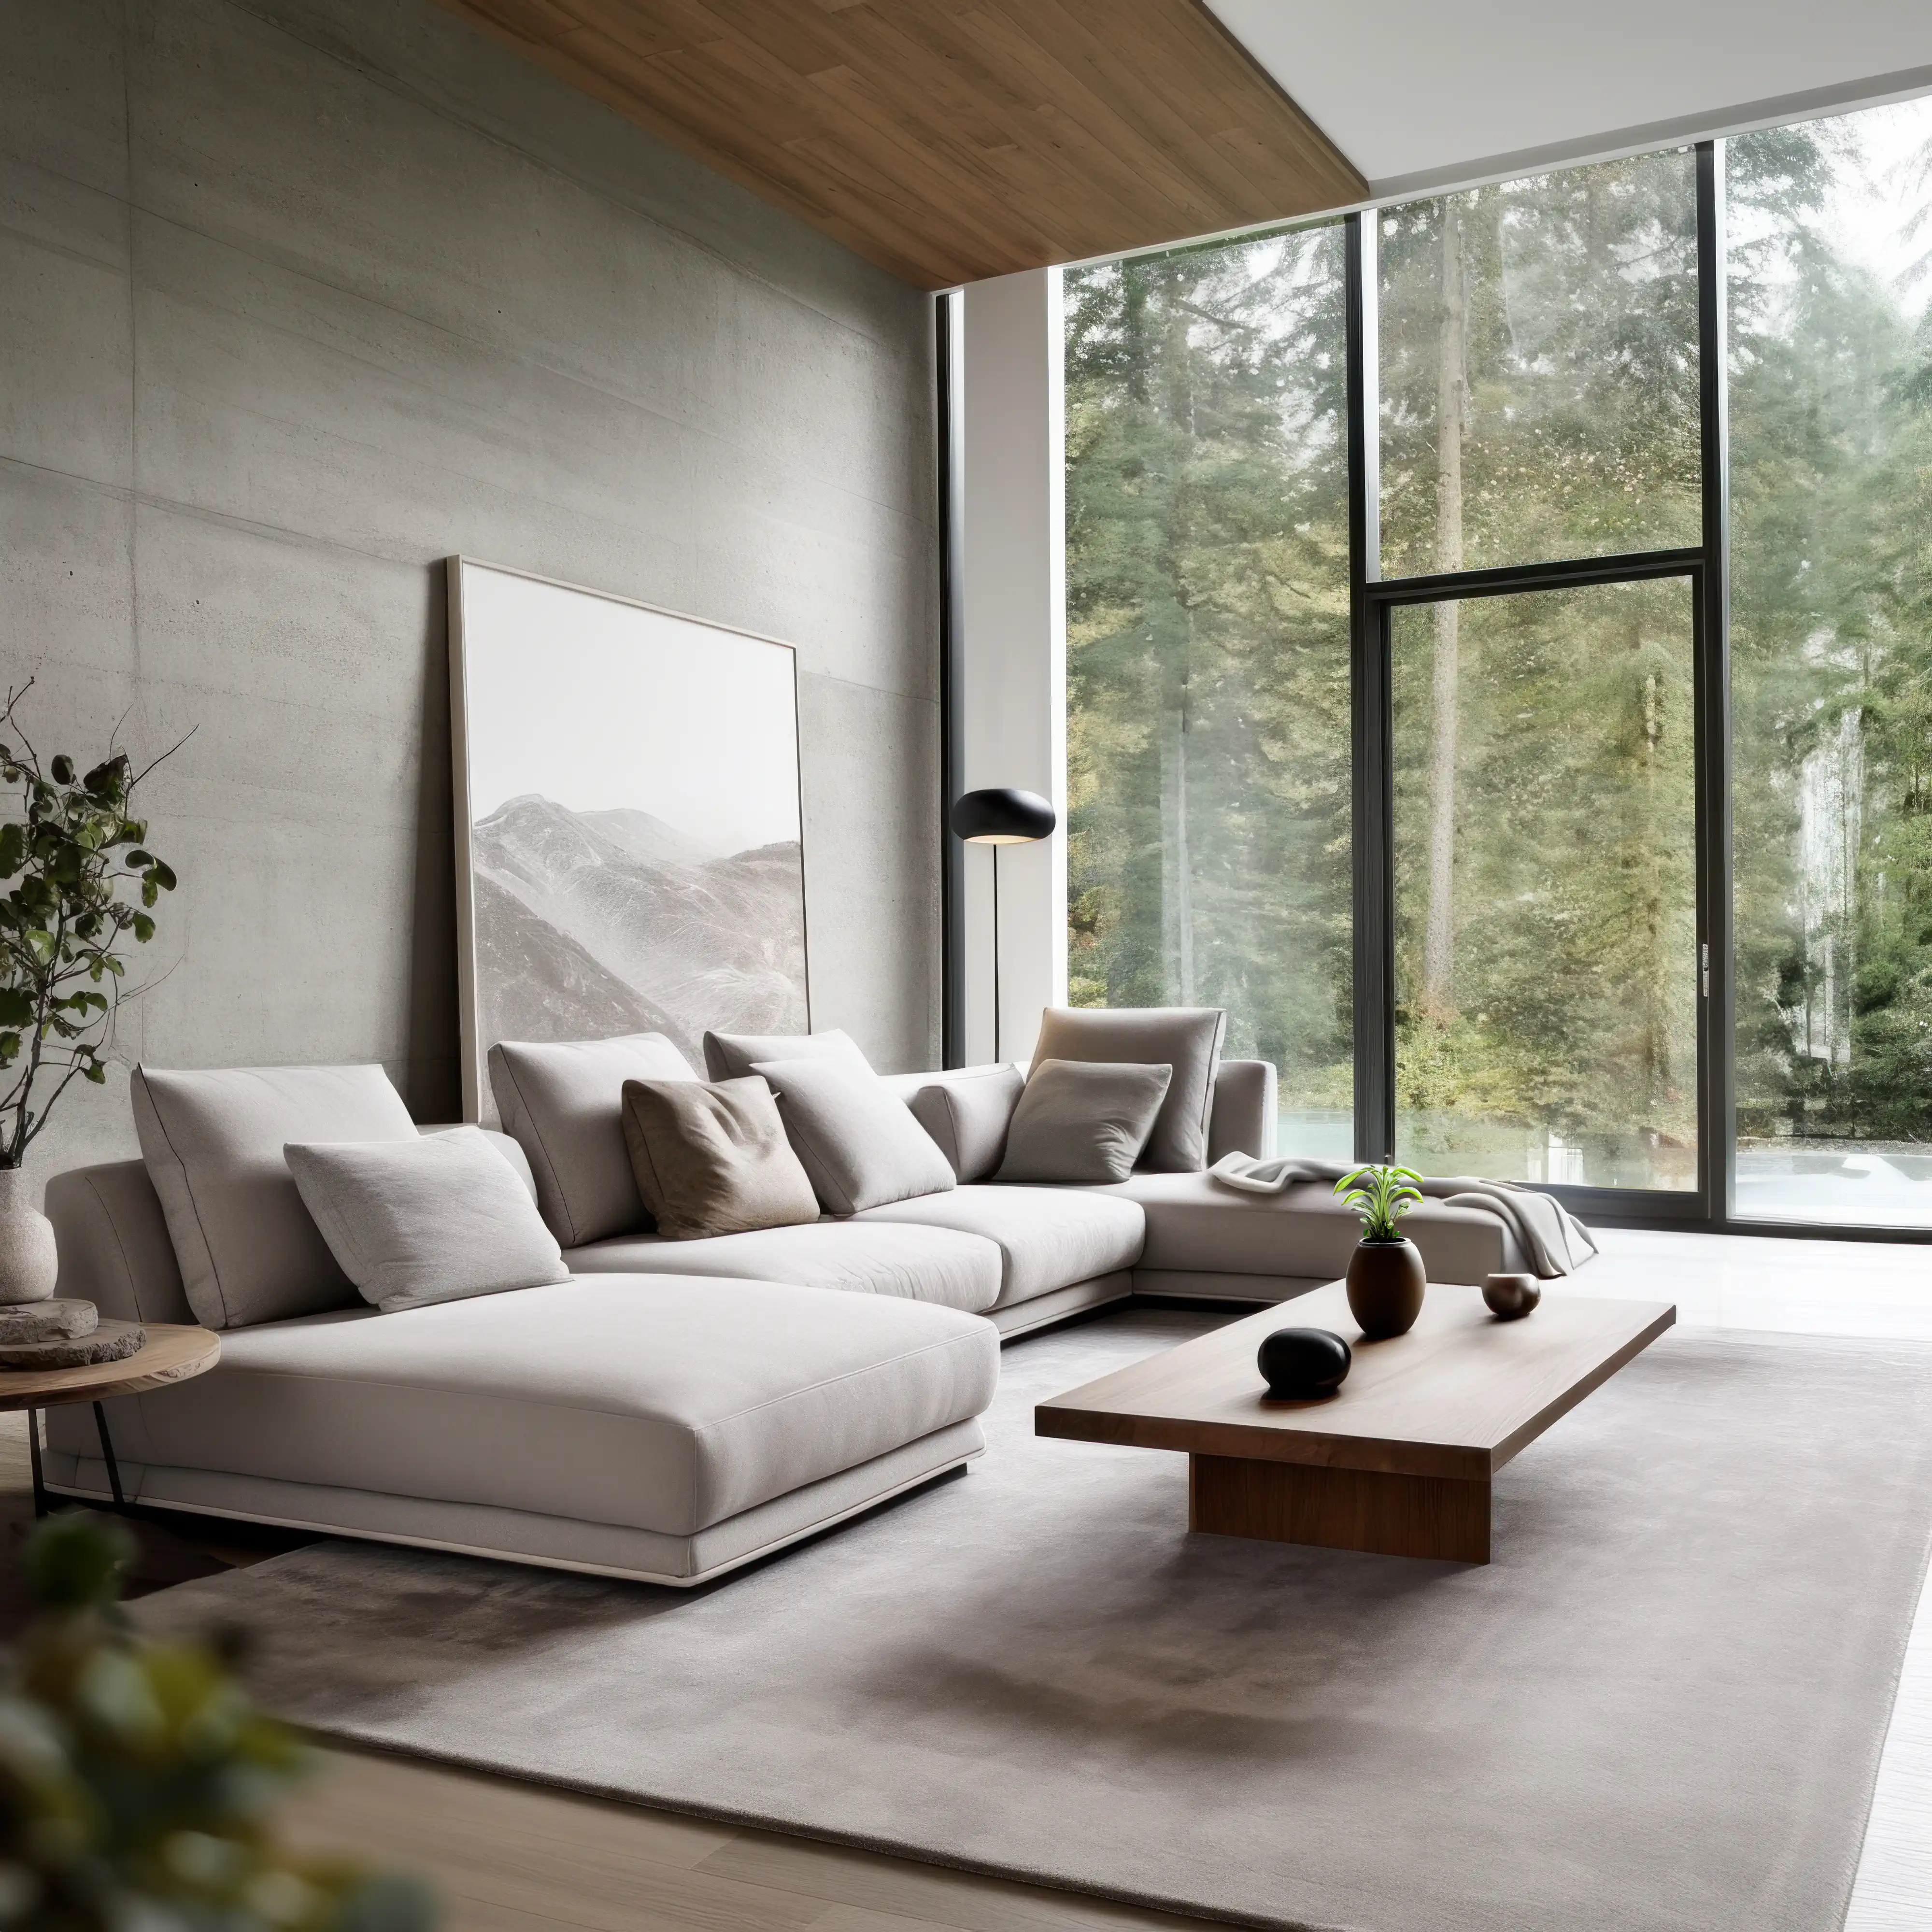 Modern living room with large windows overlooking a forest, featuring a contemporary sofa and wooden coffee table, interior by Sarah Brown Design